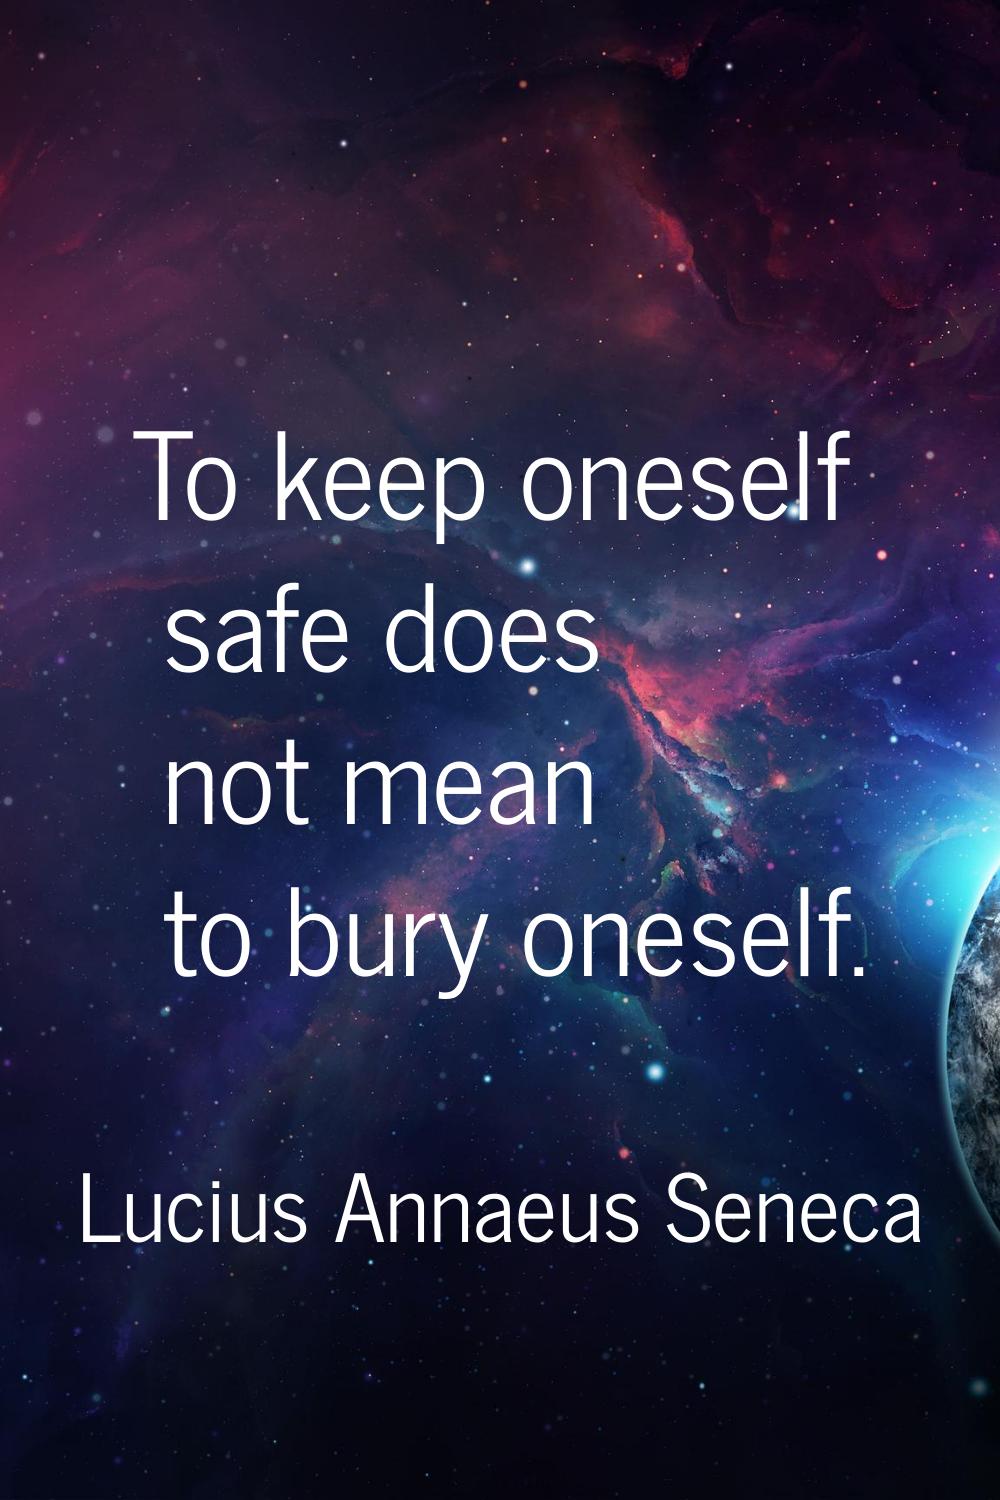 To keep oneself safe does not mean to bury oneself.